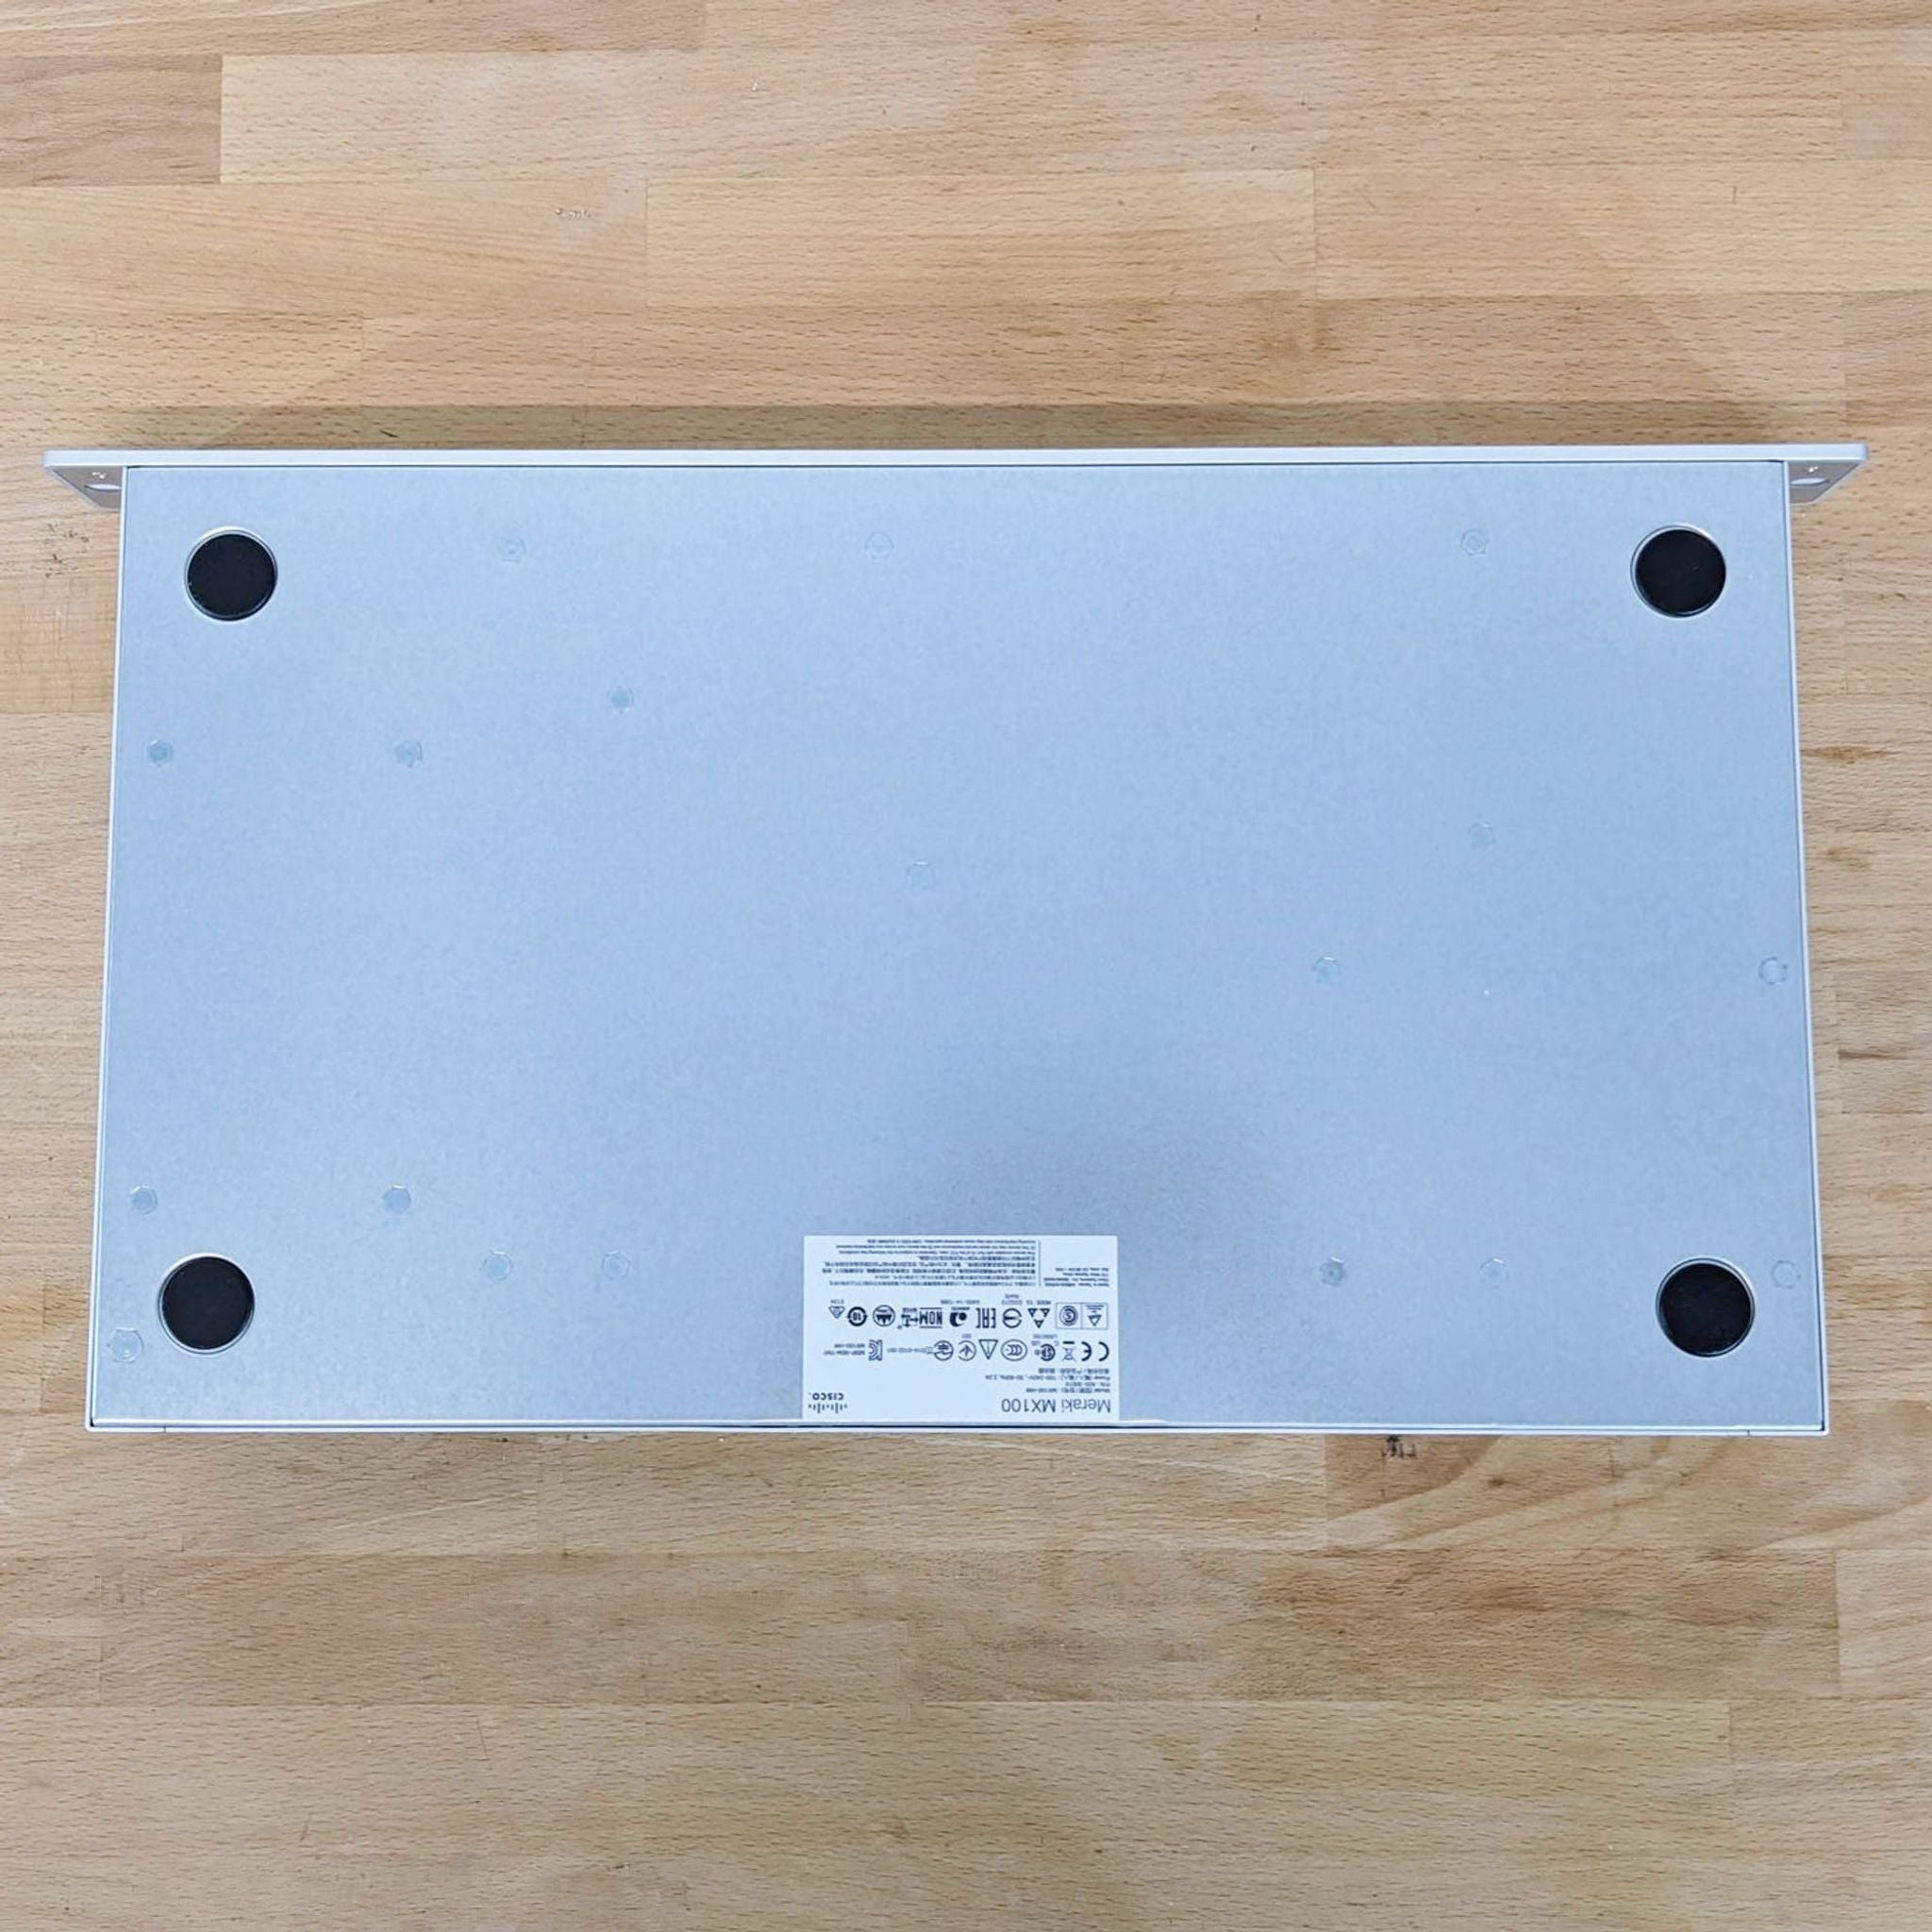 Cisco networking product top view placed on wood, showing a grey metal case with label details.